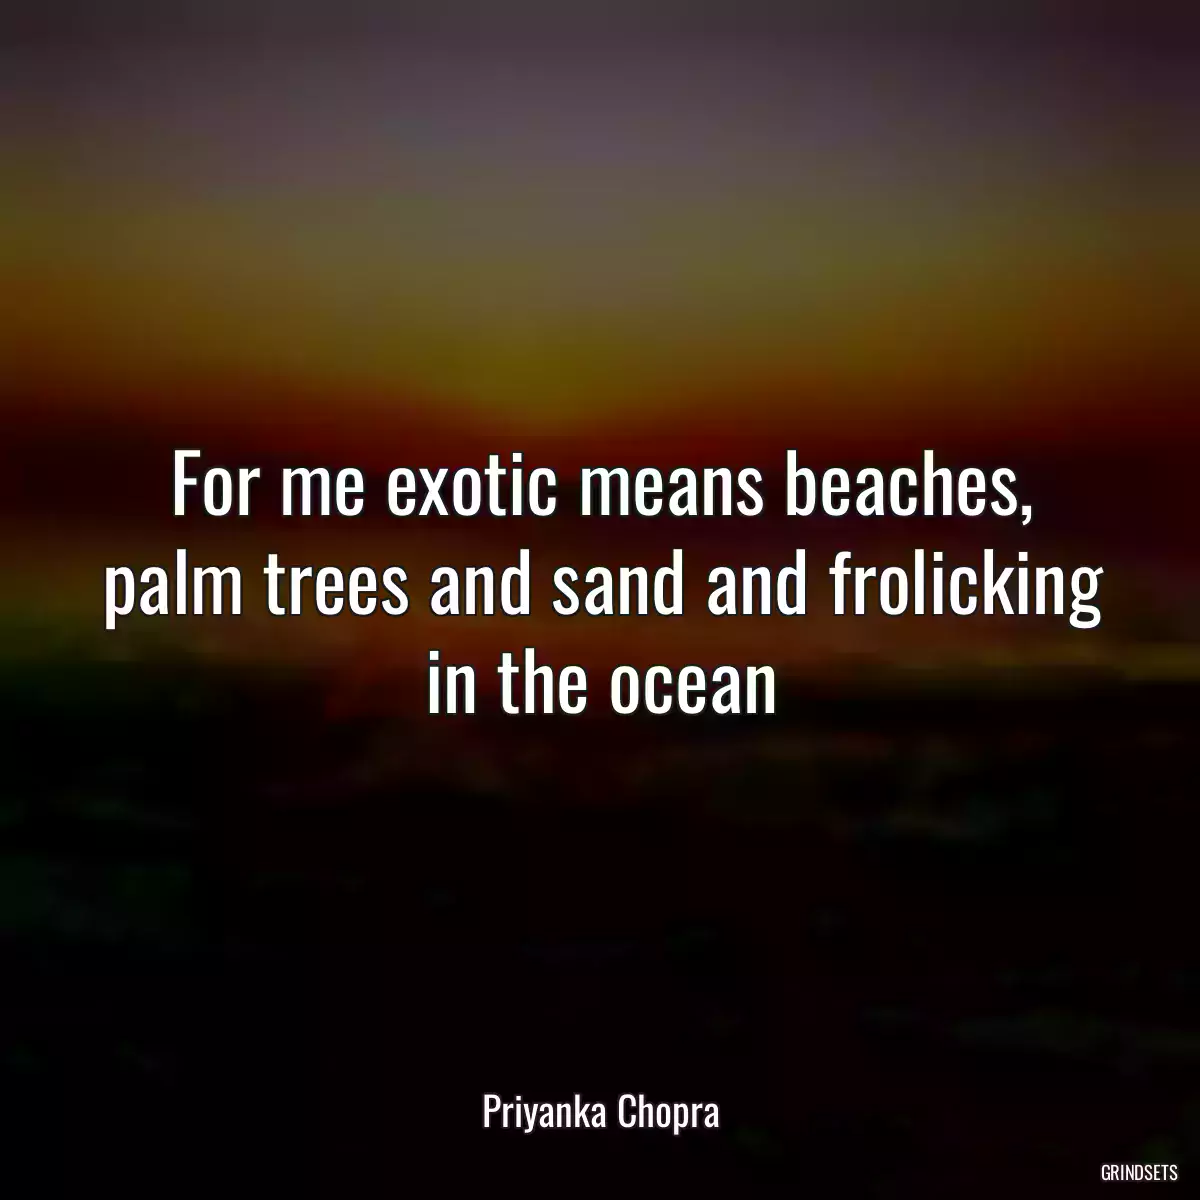 For me exotic means beaches, palm trees and sand and frolicking in the ocean